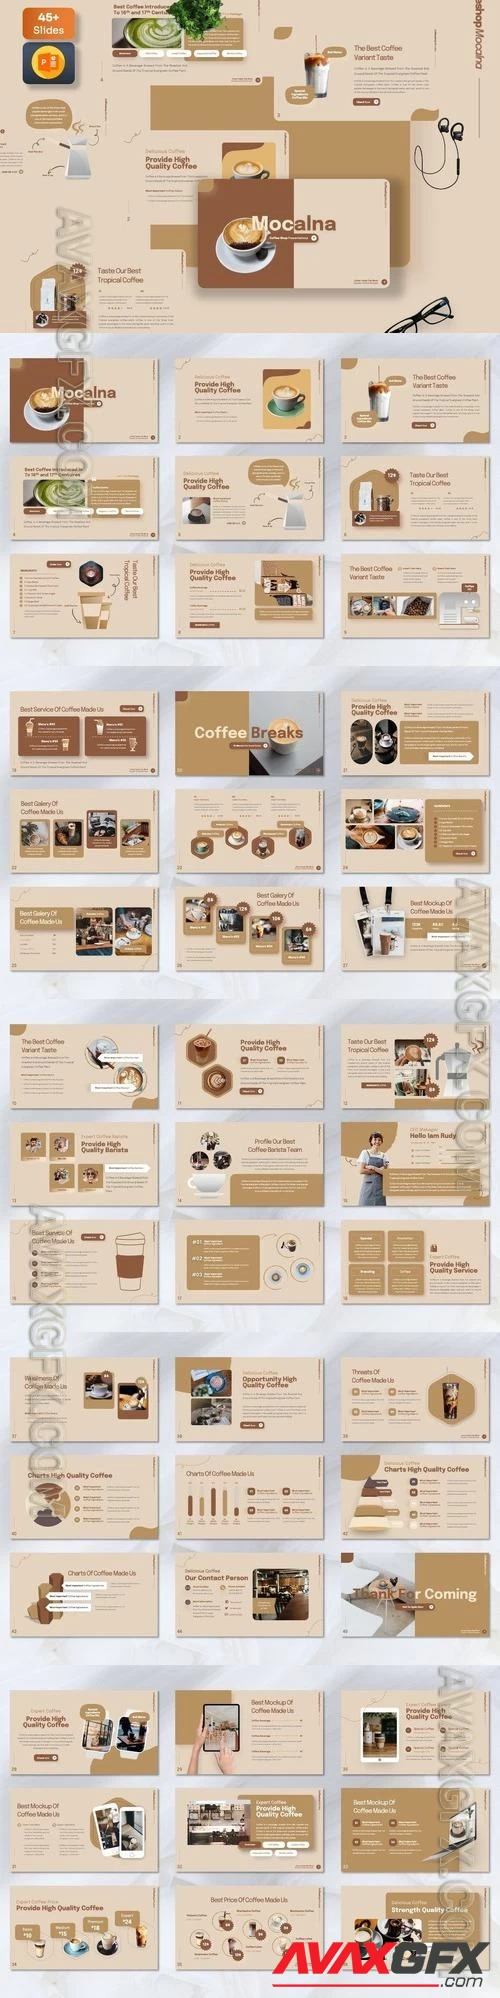 Mocalna - Coffee Powerpoint Template [PPTX]